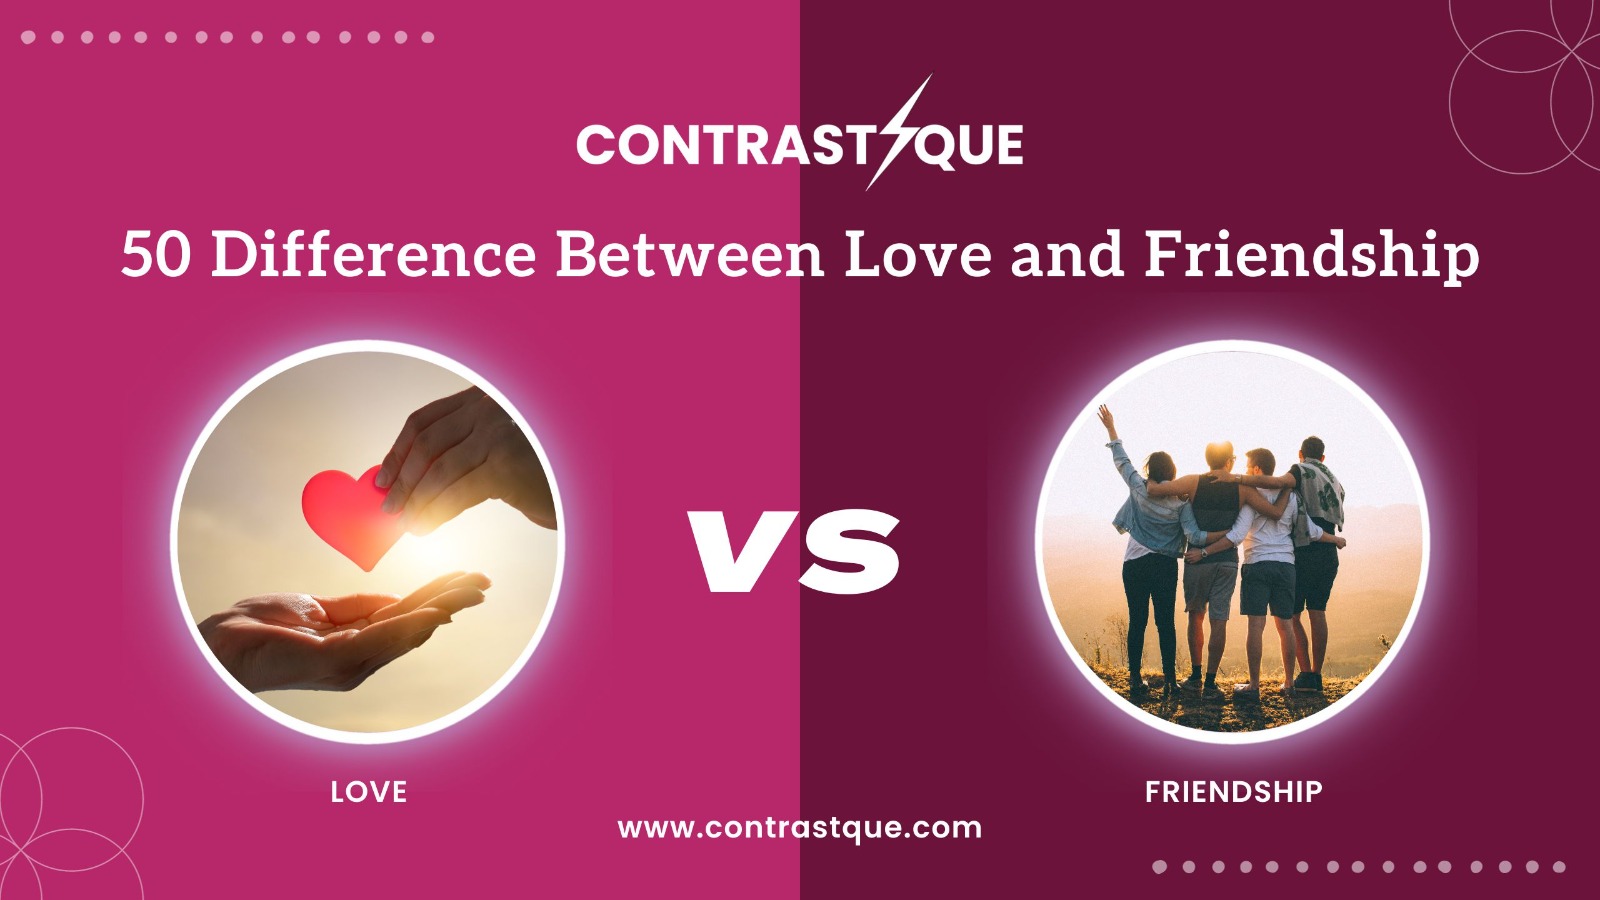 50 Difference Between Love and Friendship